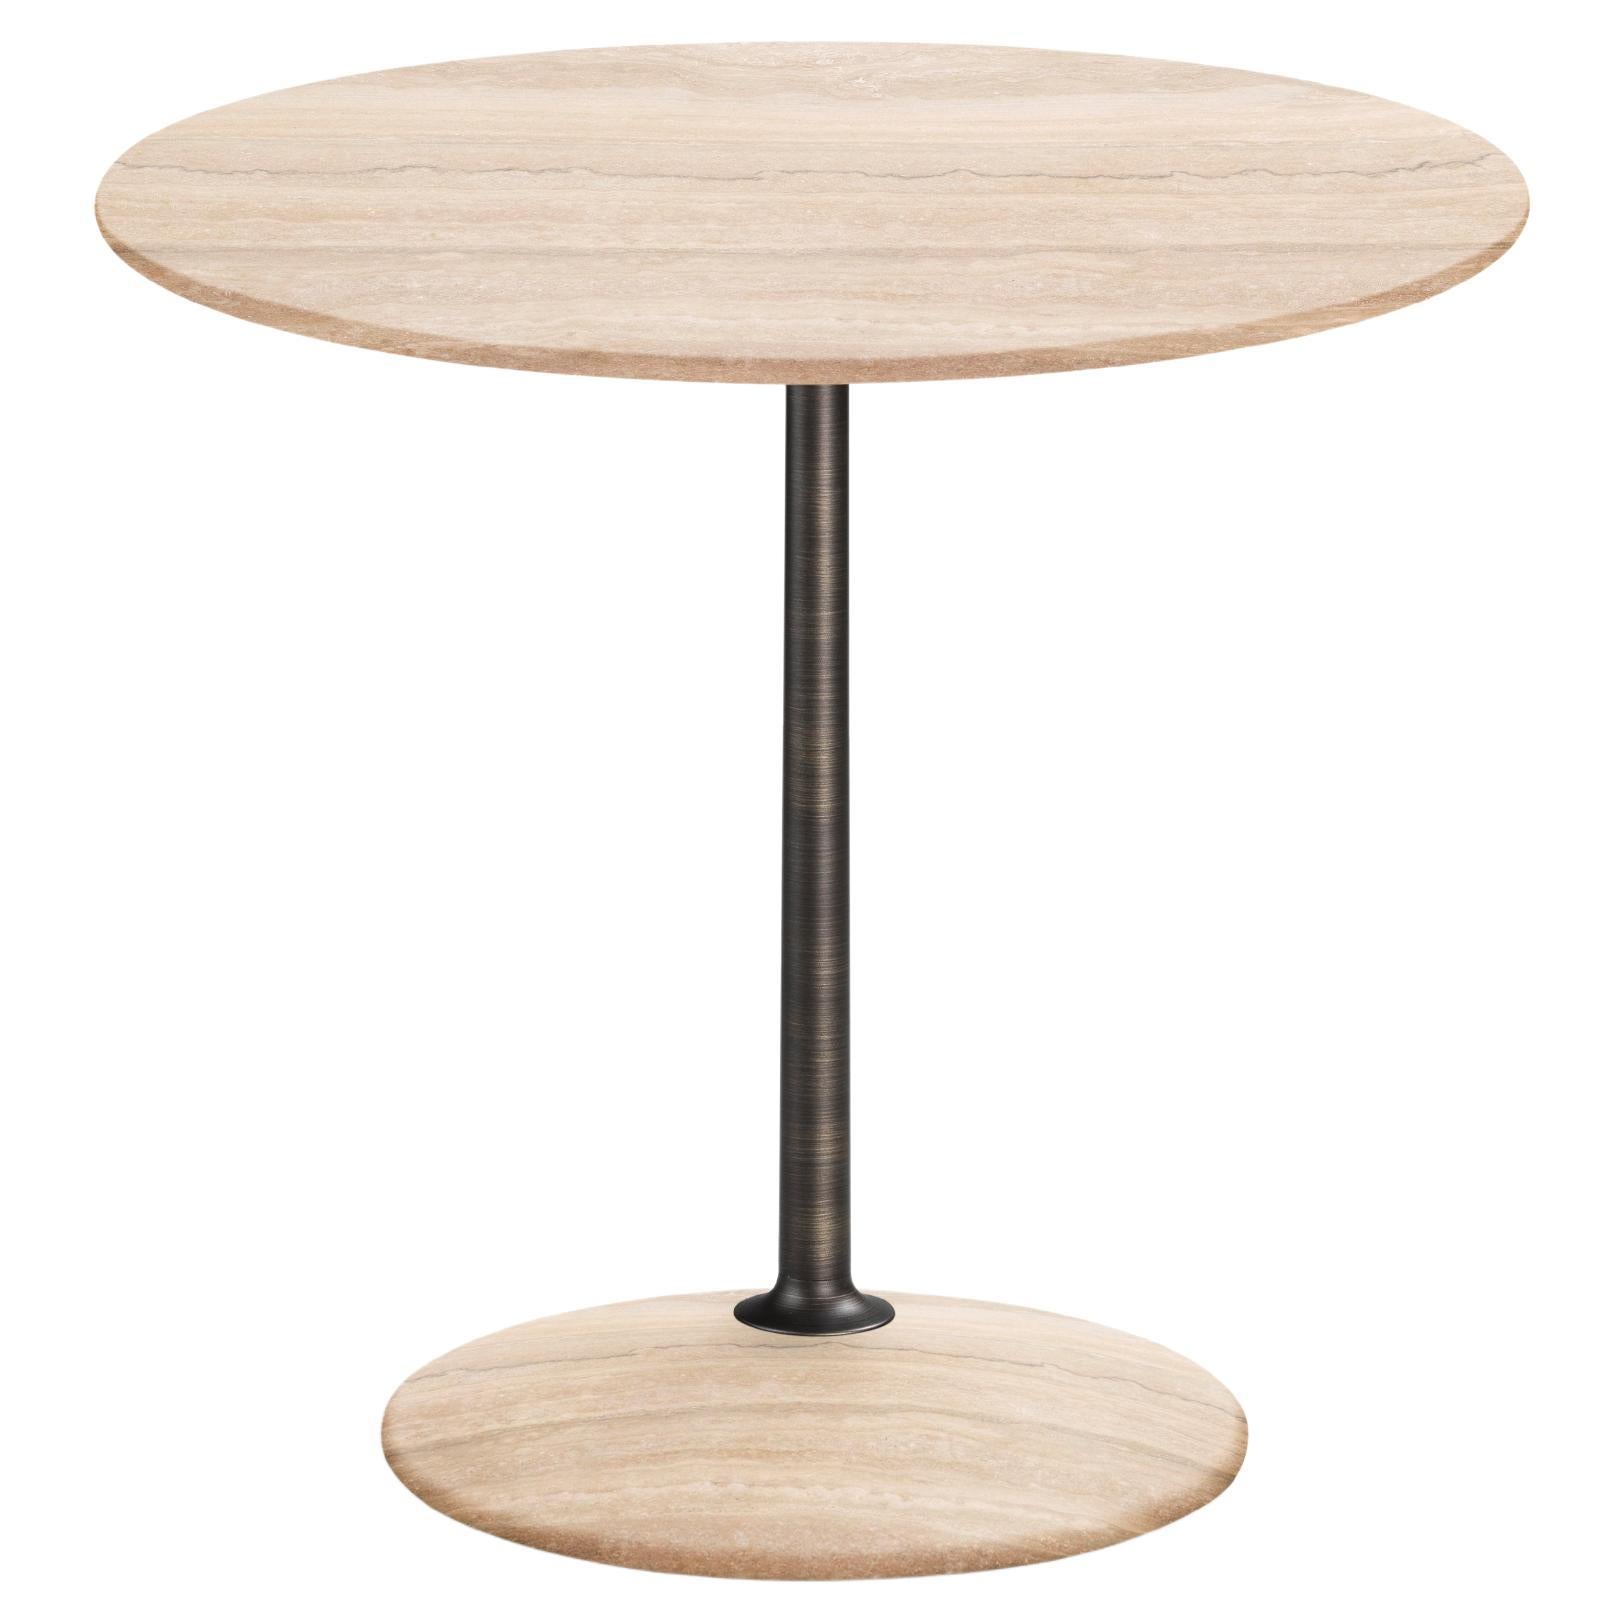 Arnold Short Table, Travertine Top, Burnished Brass Structure, Made in Italy For Sale